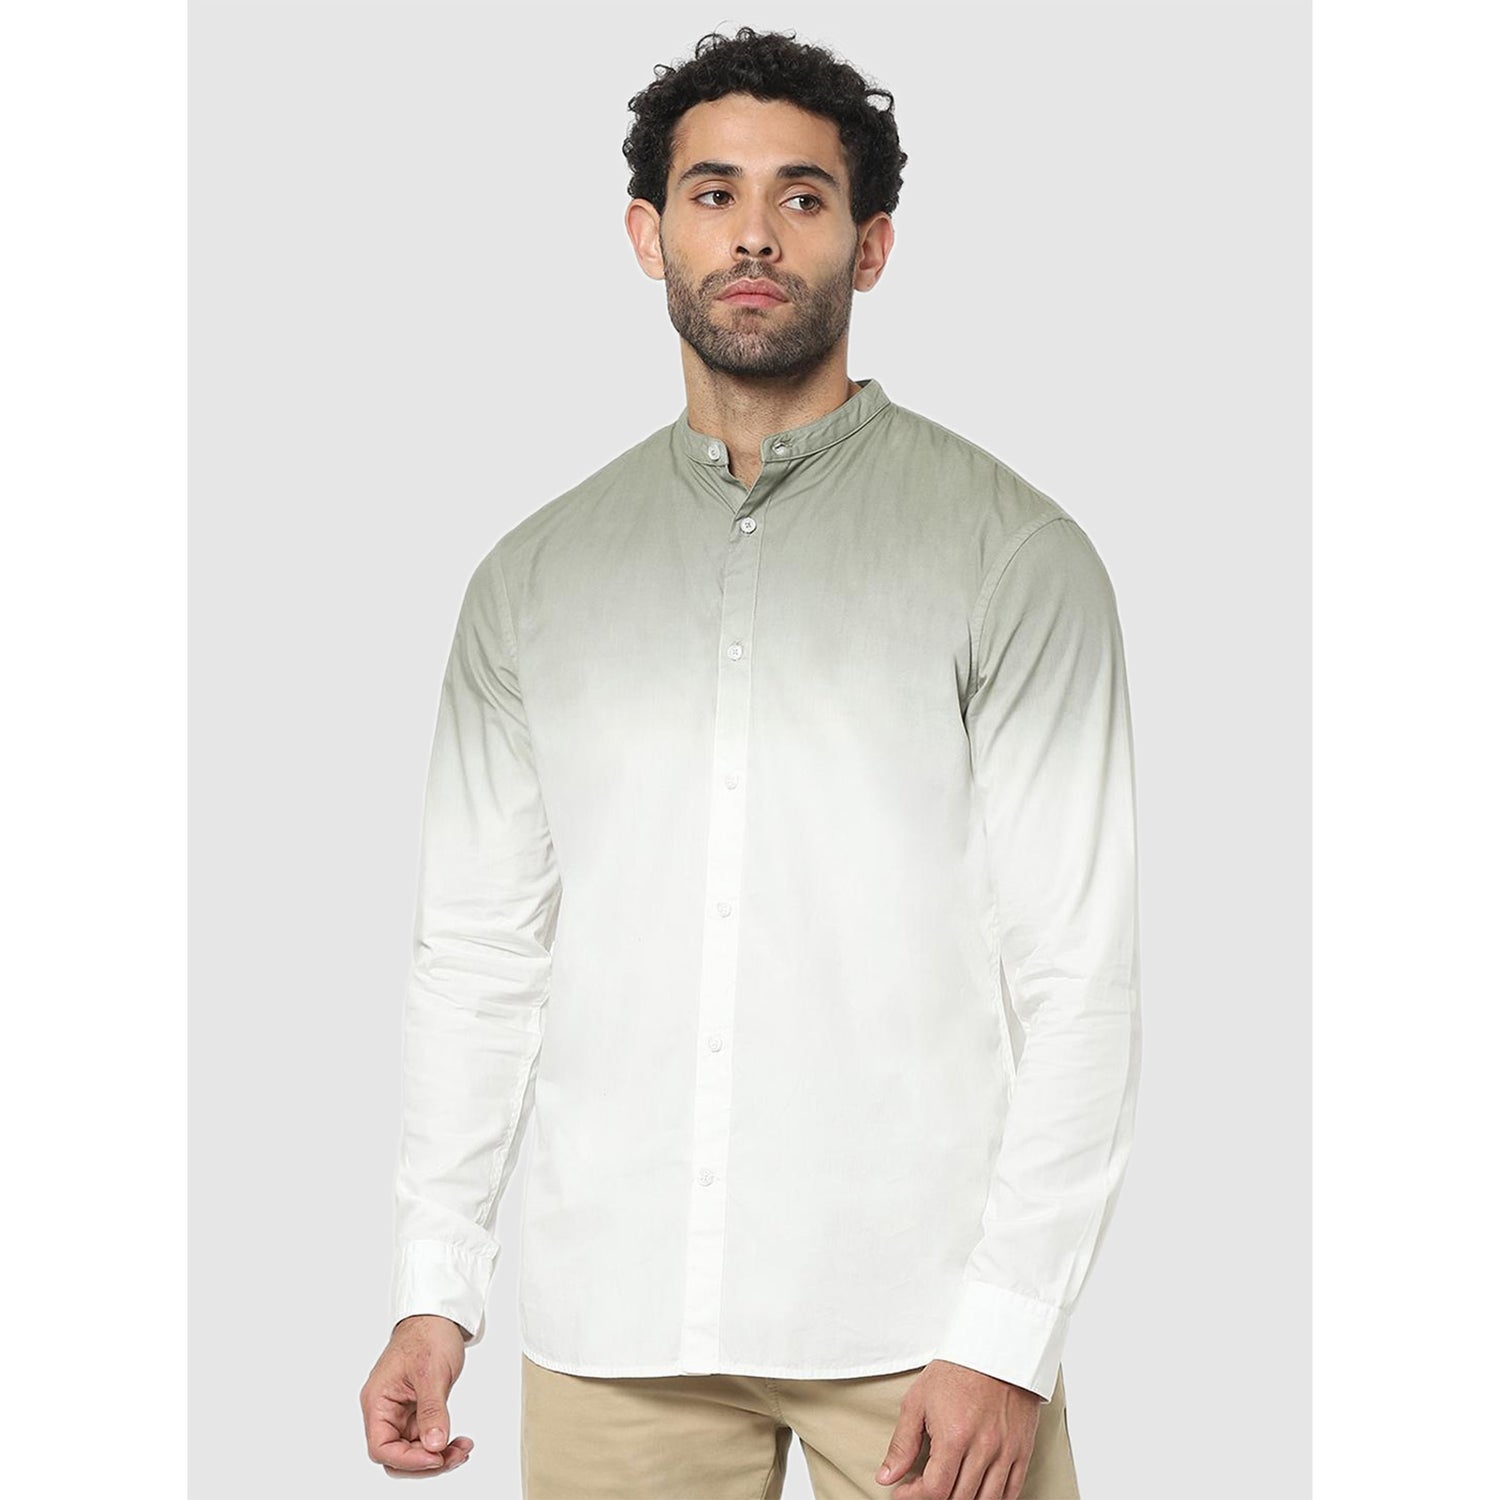 White and Grey Classic Cotton Casual Shirt (CAWAX)